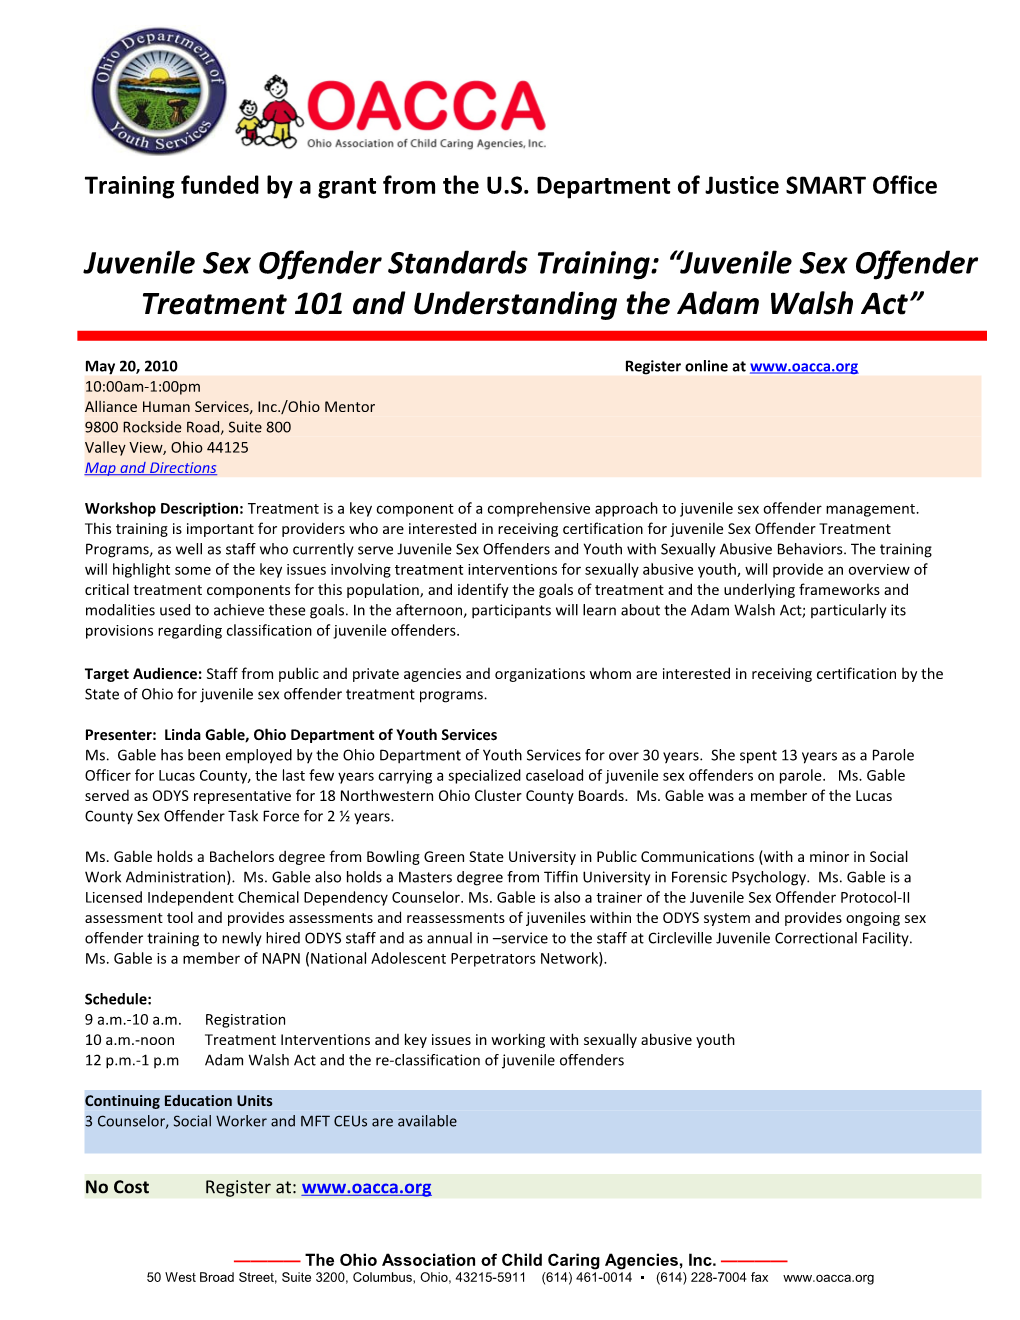 Training Funded by a Grant from the U.S. Department of Justice SMART Office